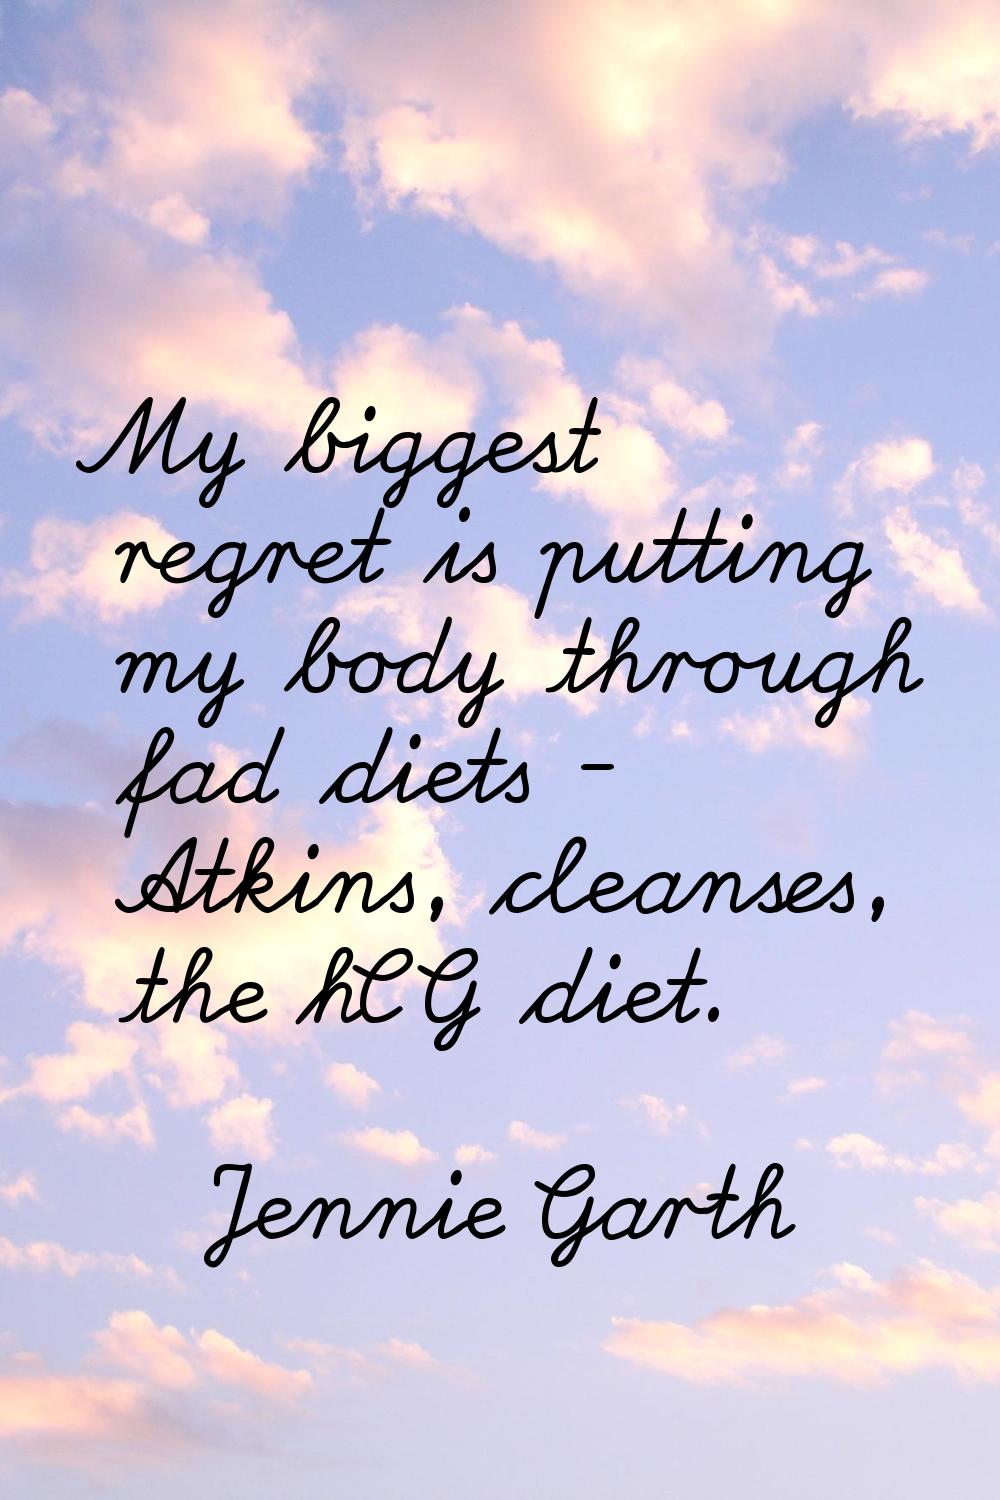 My biggest regret is putting my body through fad diets - Atkins, cleanses, the hCG diet.